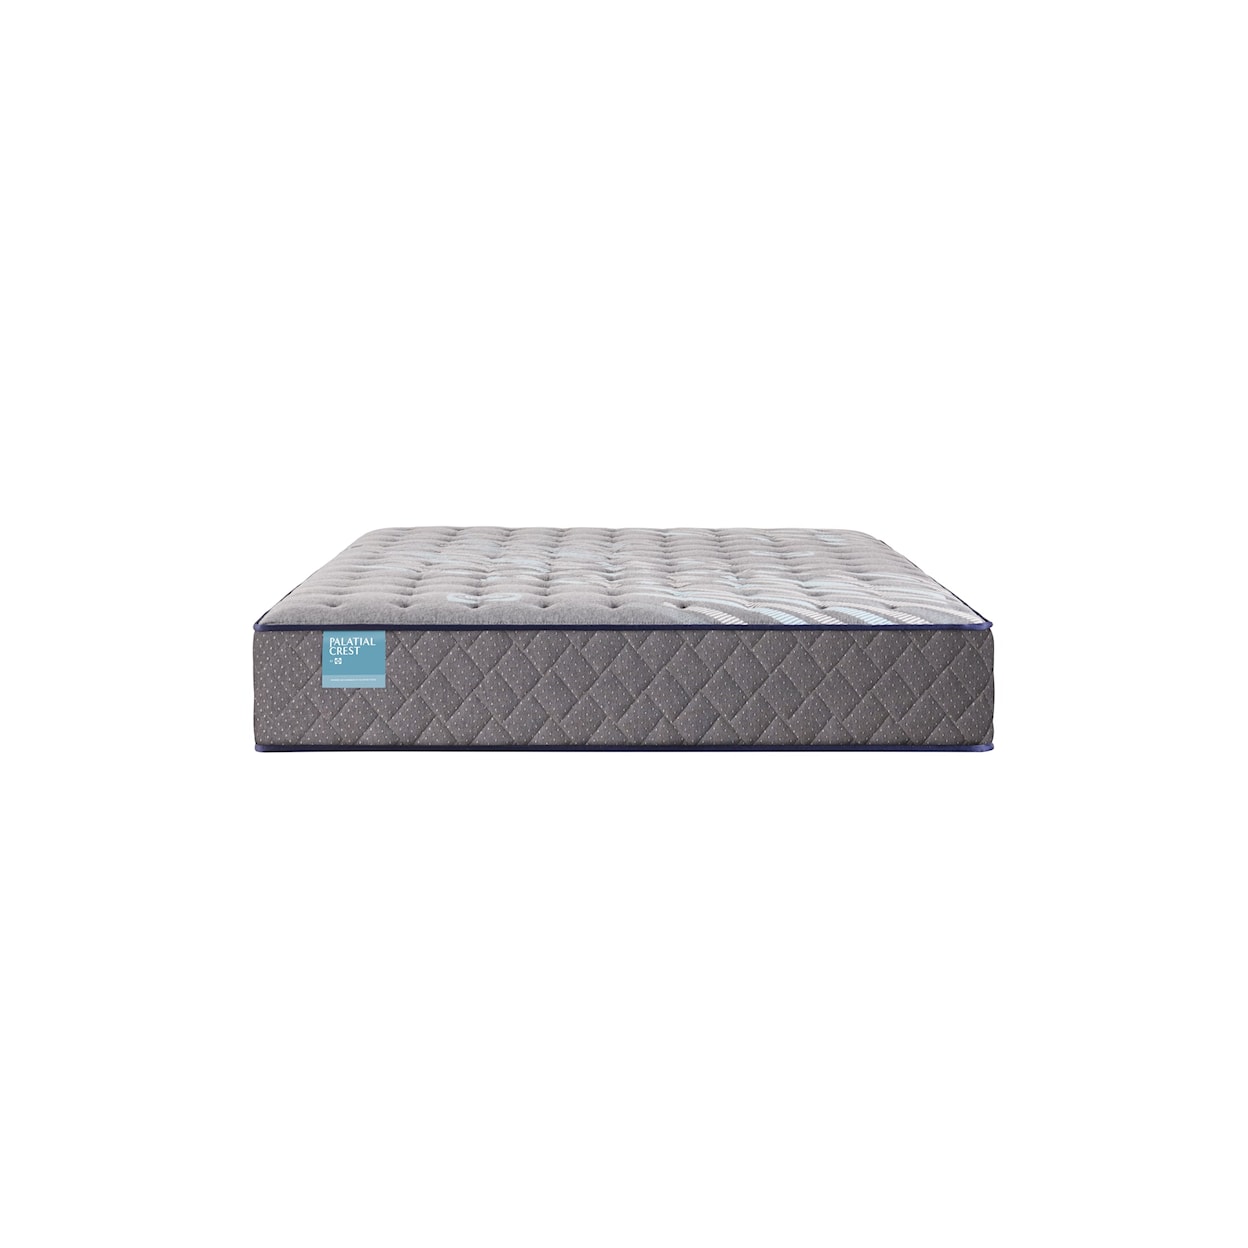 Sealy Palatial Crest S6 Cathedral Cove Firm TT King Mattress